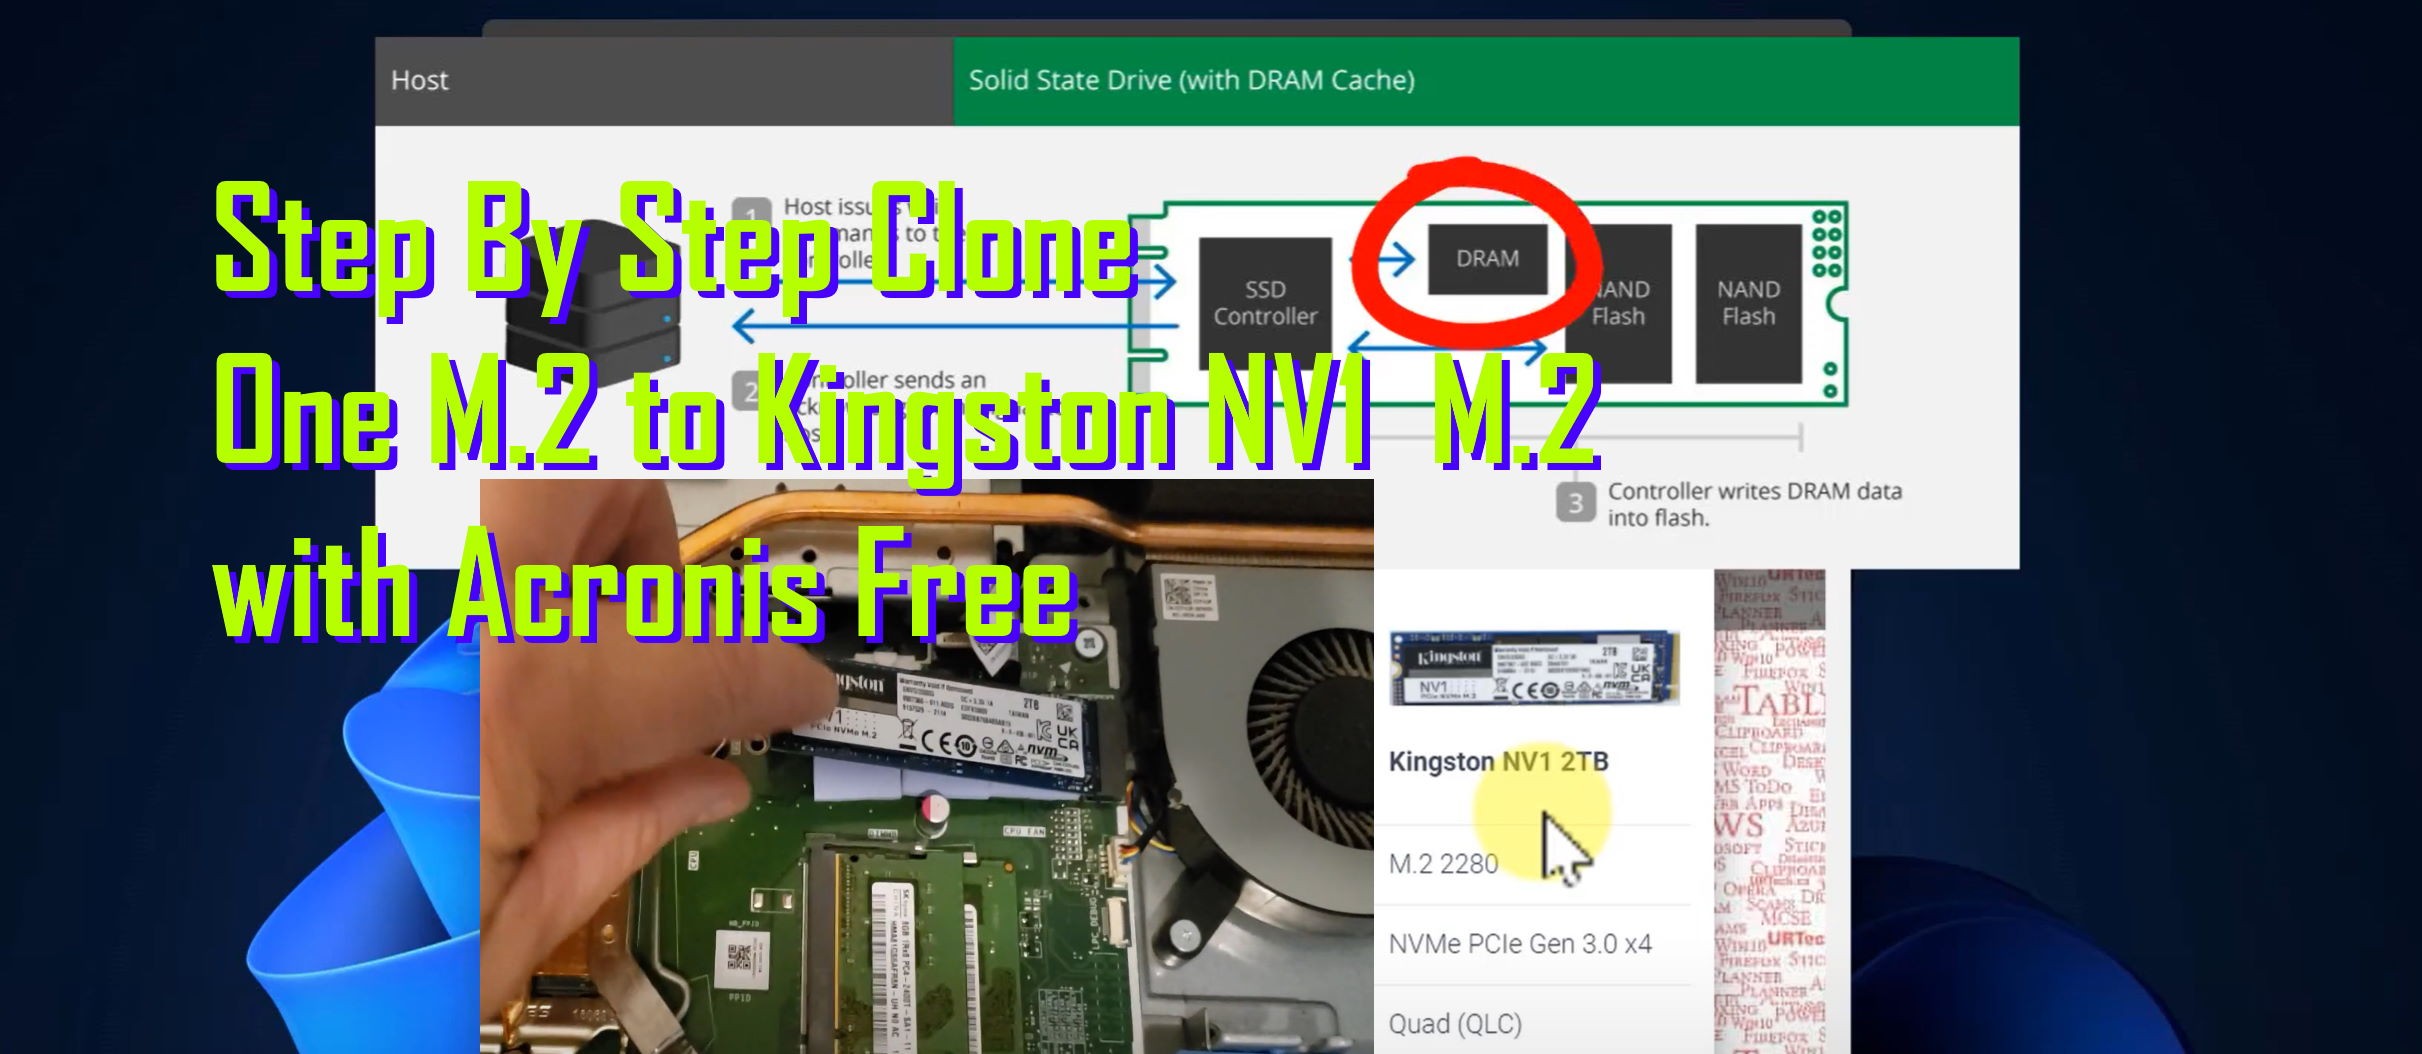 Auckland bassin fritaget SOLVED: VIDEO: Step By Step Kingston NV1 M.2 SSD Drive Clone Acronis Free +  Benchmark | Up & Running Technologies, Tech How To's